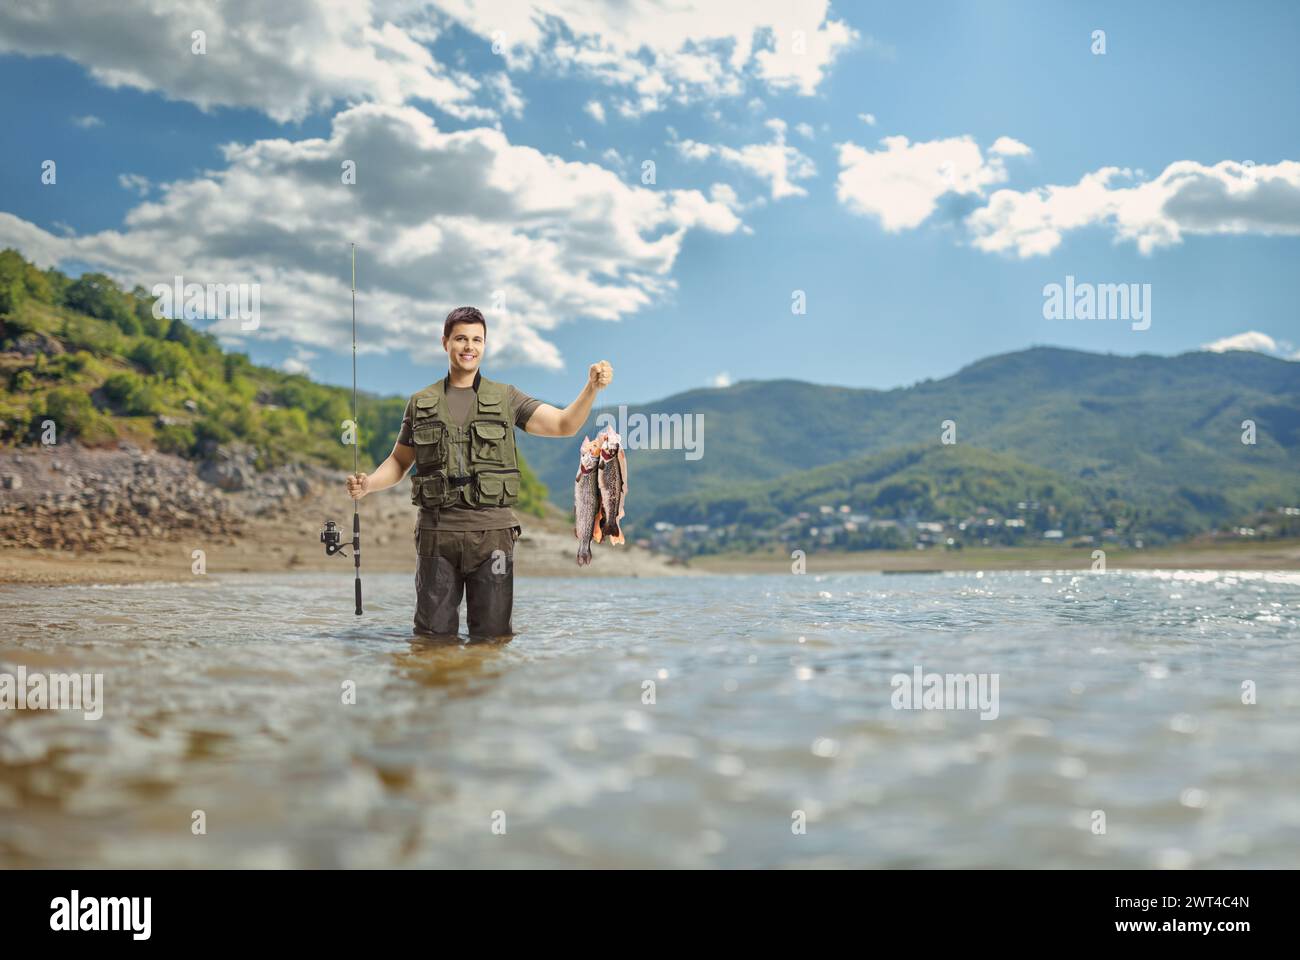 Young fisherman posing with a fishing rod and fish inside a lake Stock Photo